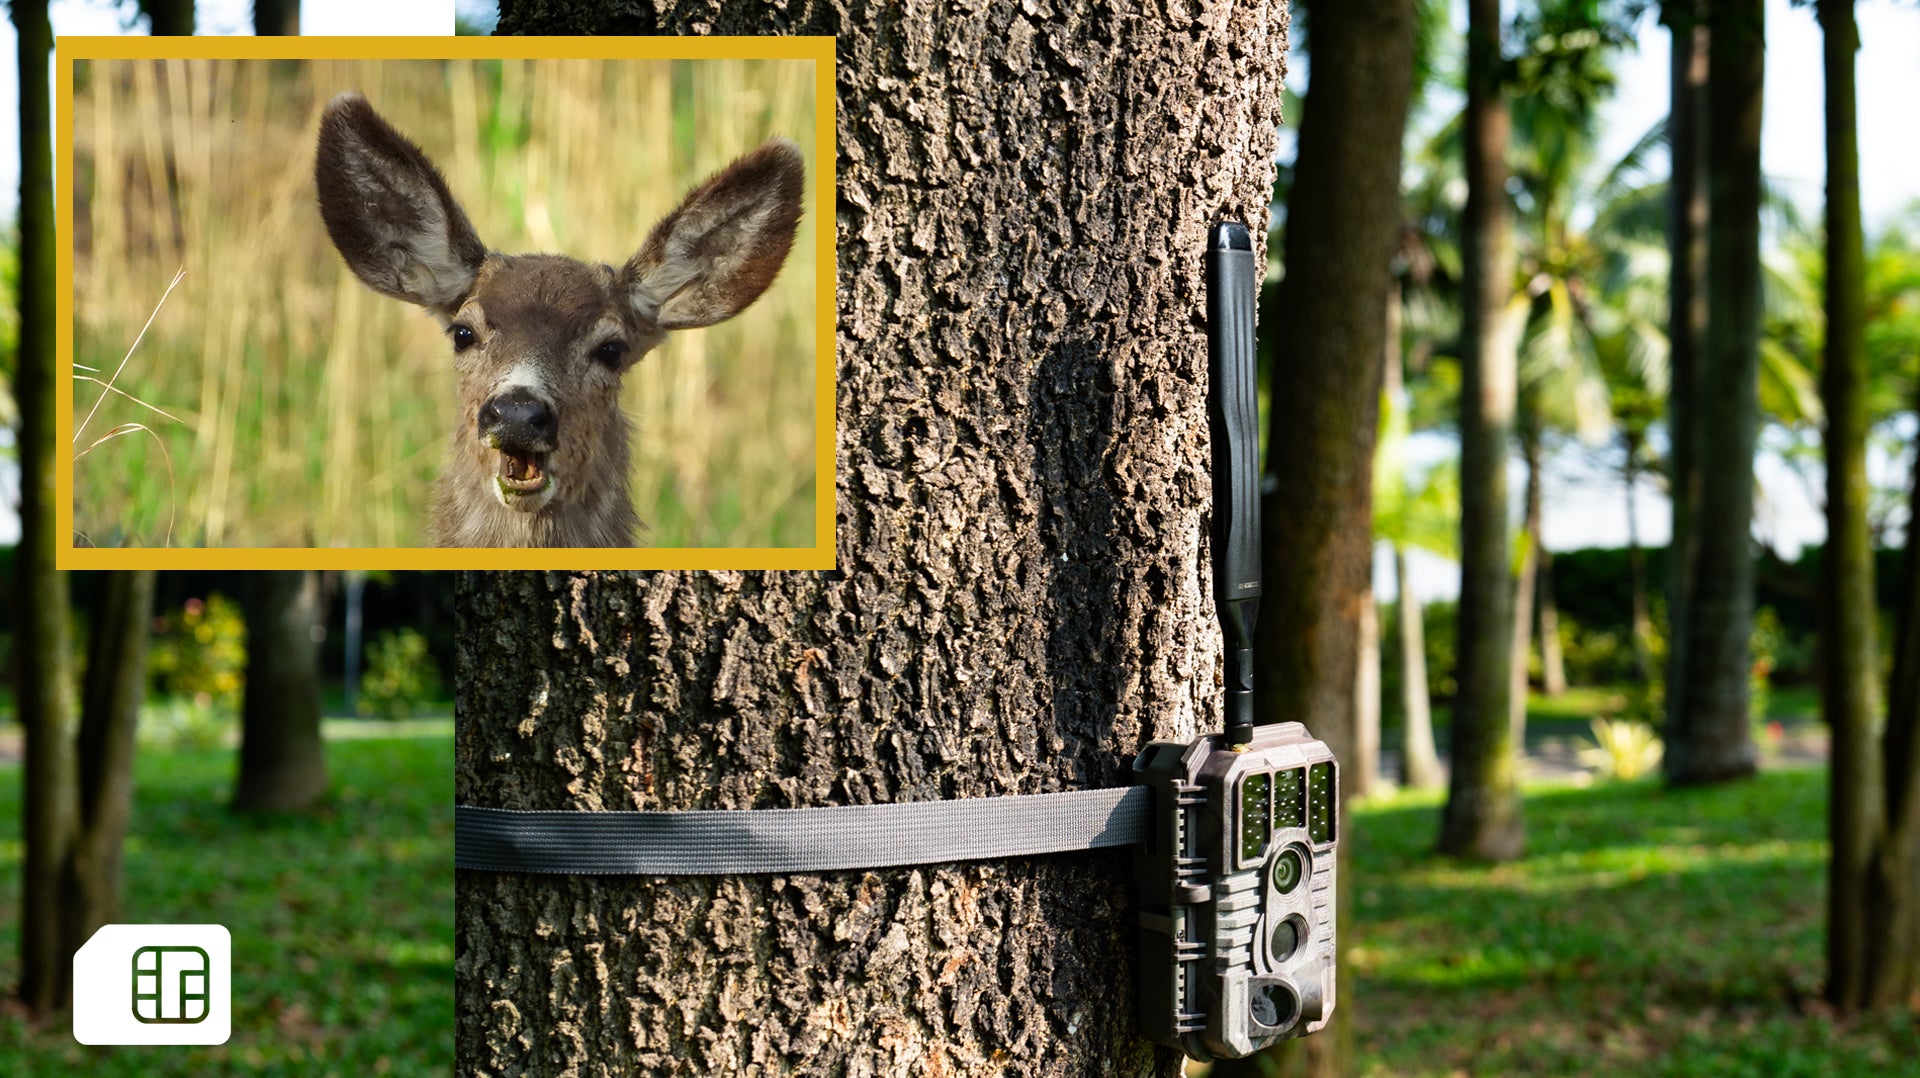 How to activate GardePro Cellular Trail Camera Freedom?